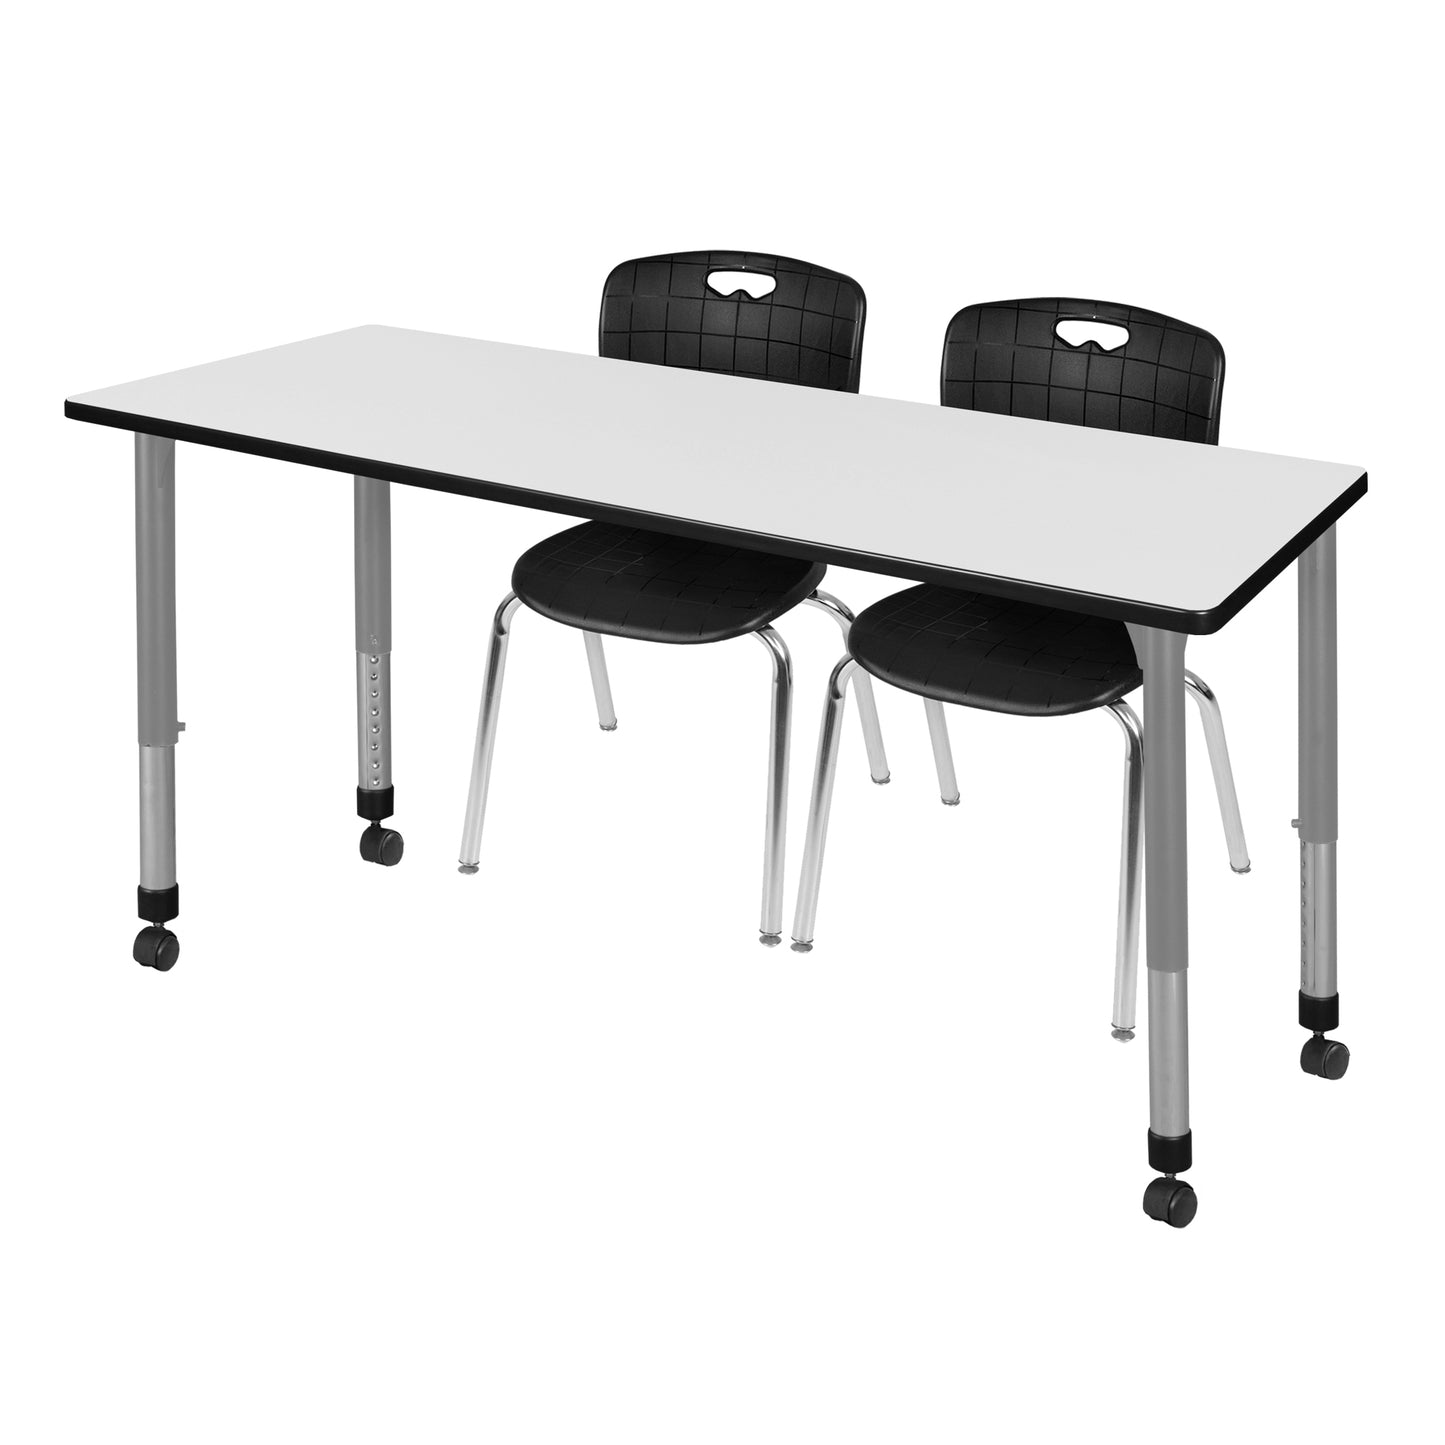 Regency Kee 60 x 24 in. Adjustable Classroom Table- Cherry & 2 Andy 18 in. Stack Chairs